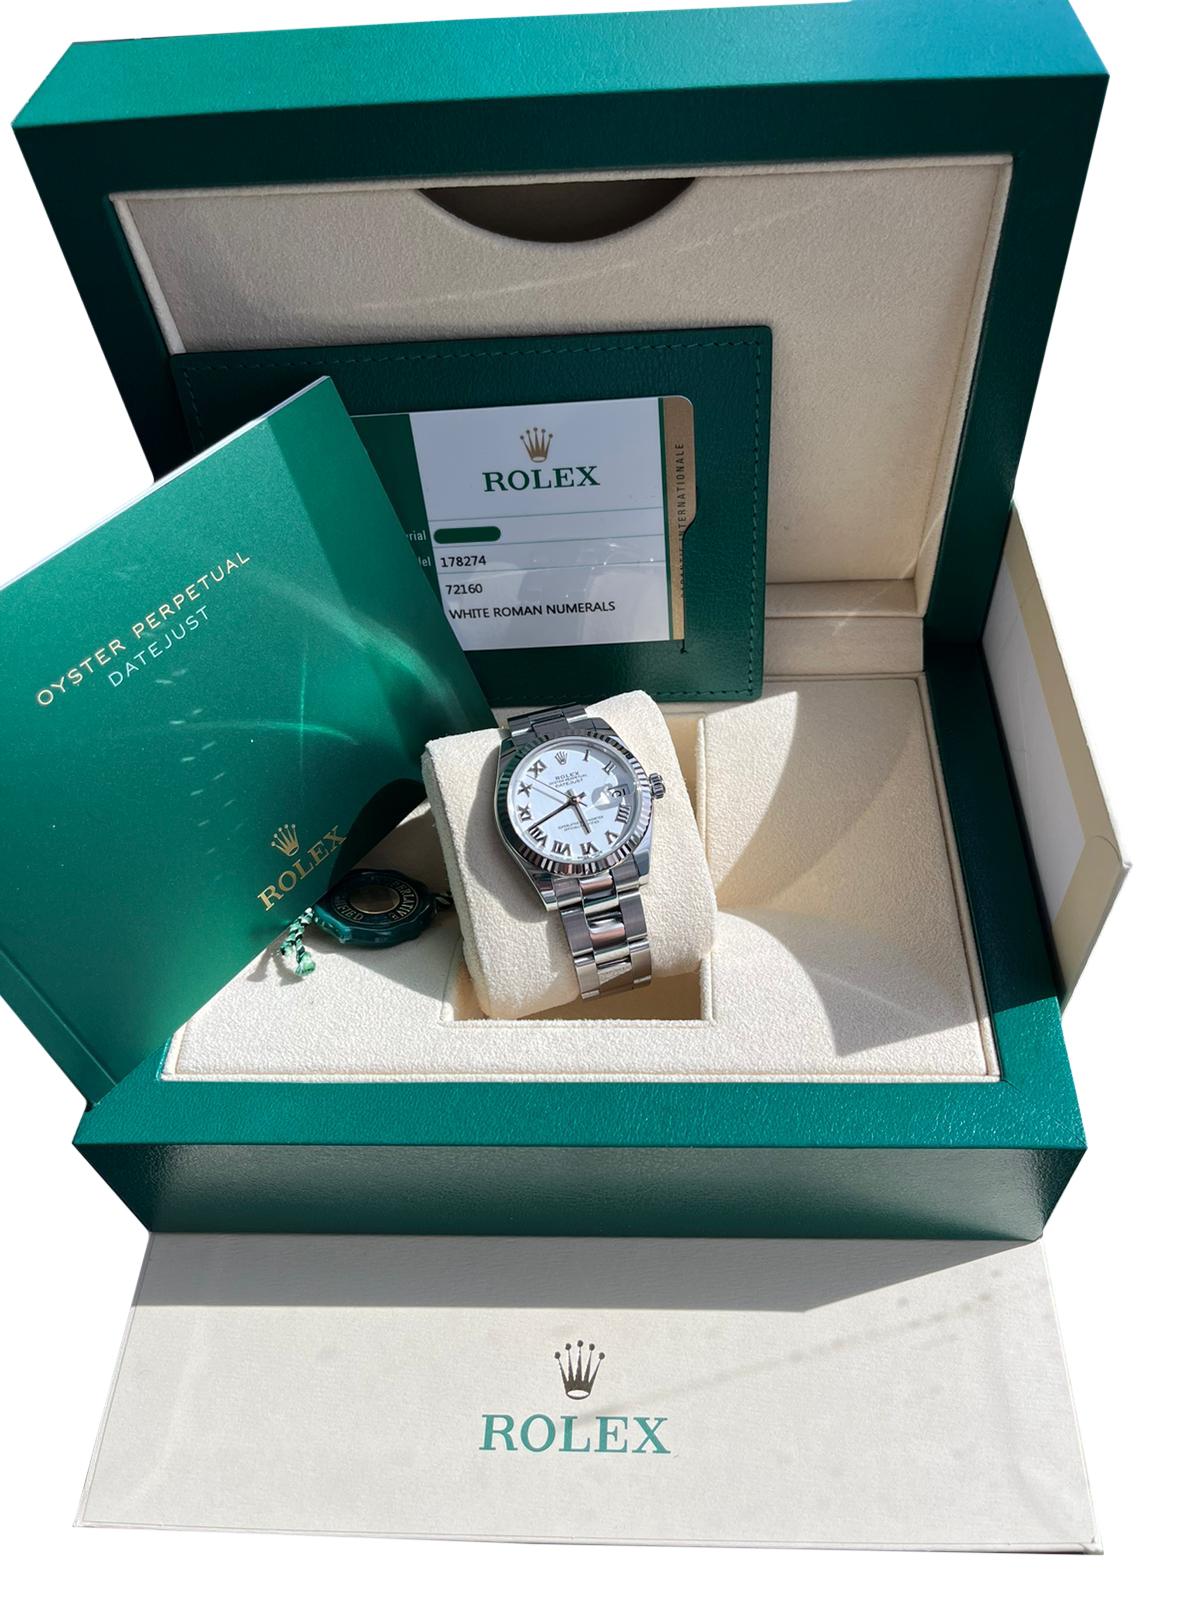 The Mid-size Rolex Lady Datejust 178274 for sale here is perfectly on trend with a larger 31mm Oyster case and a modern design. Styled to make a fashion-forward impact on the wrist, the case is equipped with a fluted bezel and a gorgeous White dial